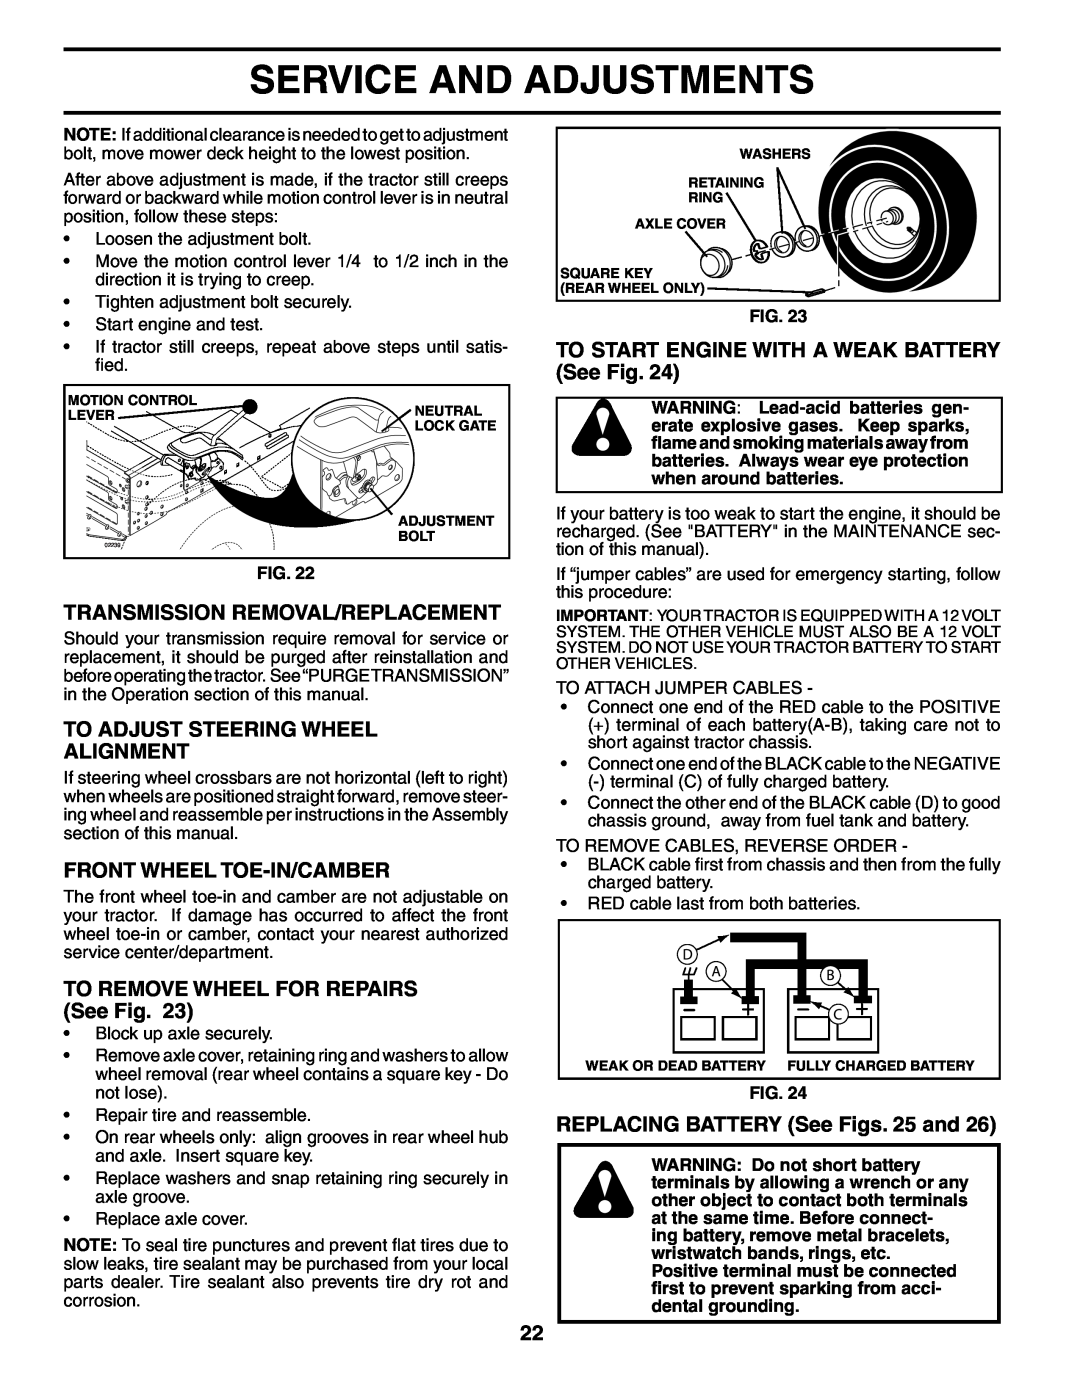 Poulan PO175H42STA manual Transmission Removal/Replacement, To Adjust Steering Wheel Alignment, Front Wheel Toe-In/Camber 